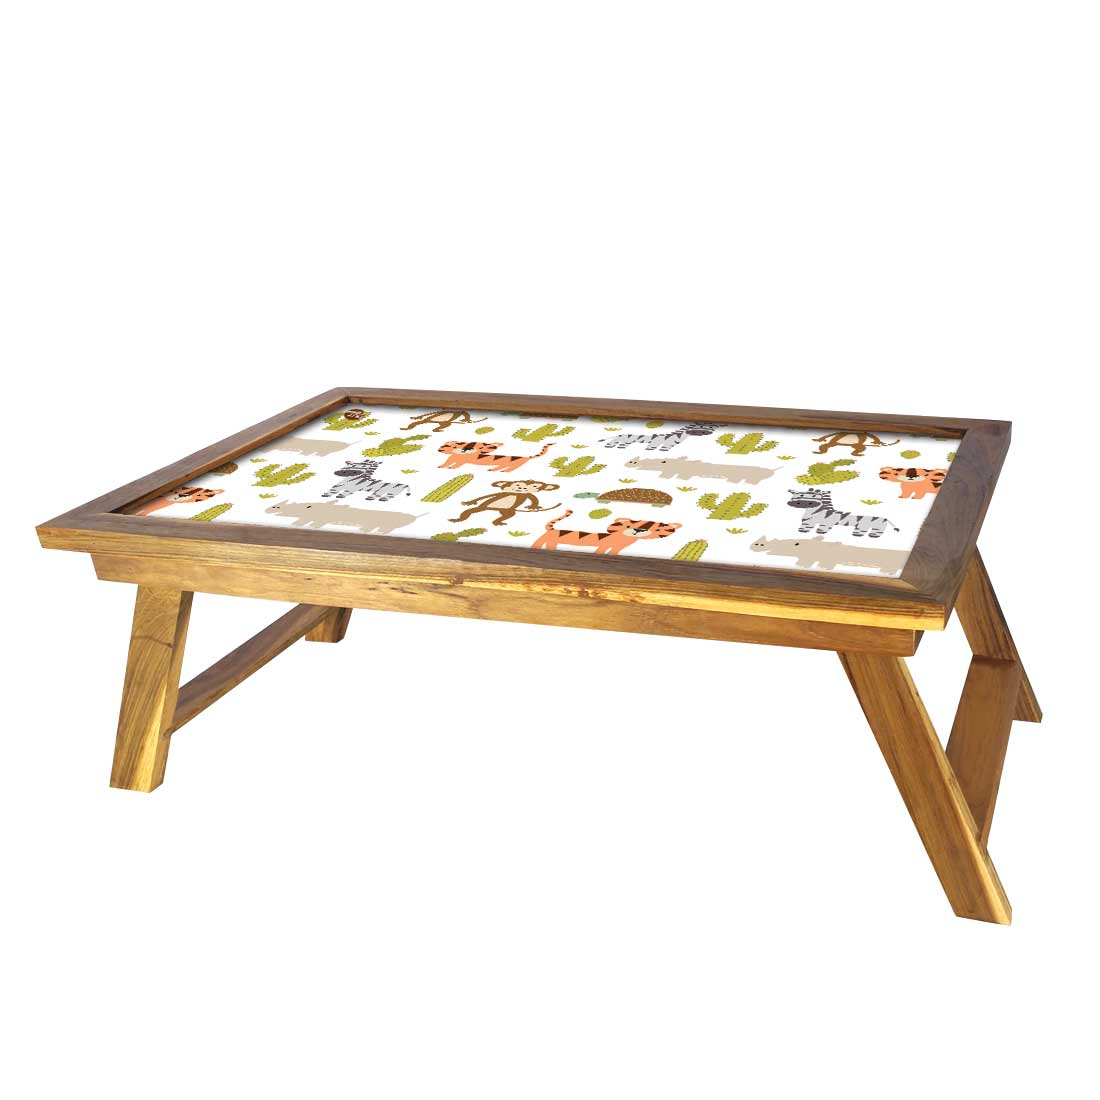 Designer Wooden Lap Tray for Eating Breakfast Table - Animals & Cactus Nutcase